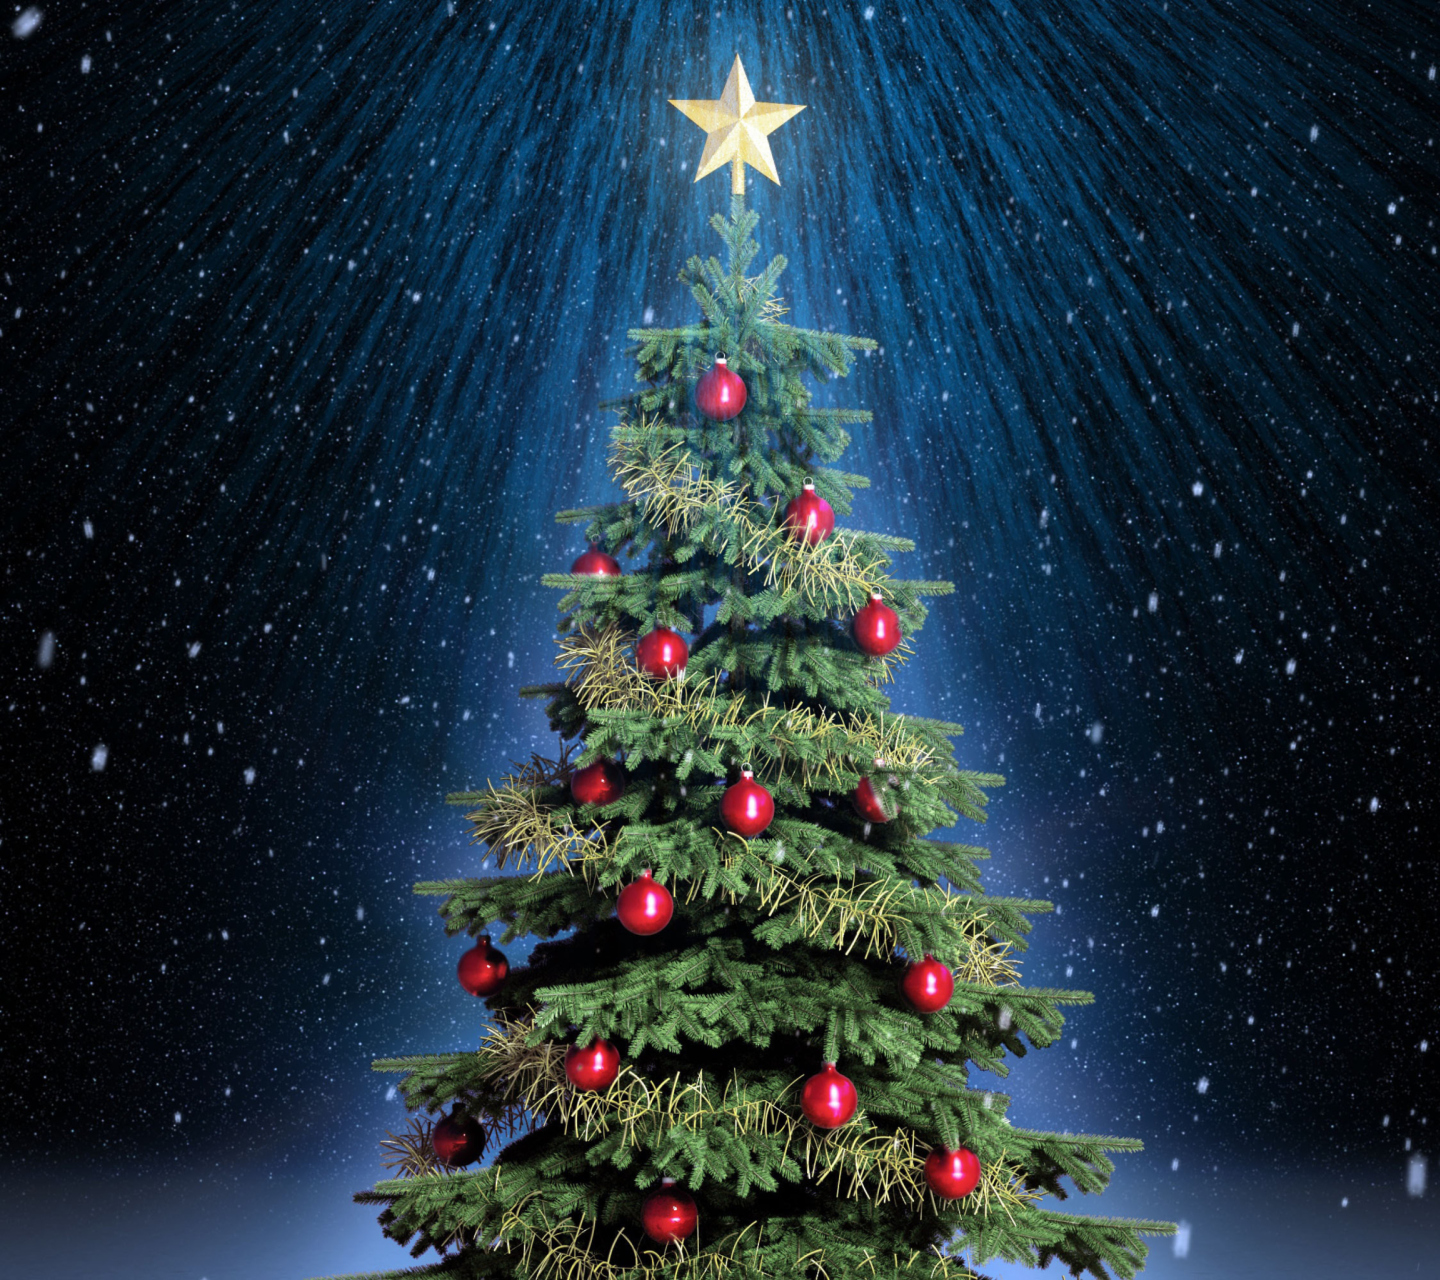 Classic Christmas Tree With Star On Top wallpaper 1440x1280